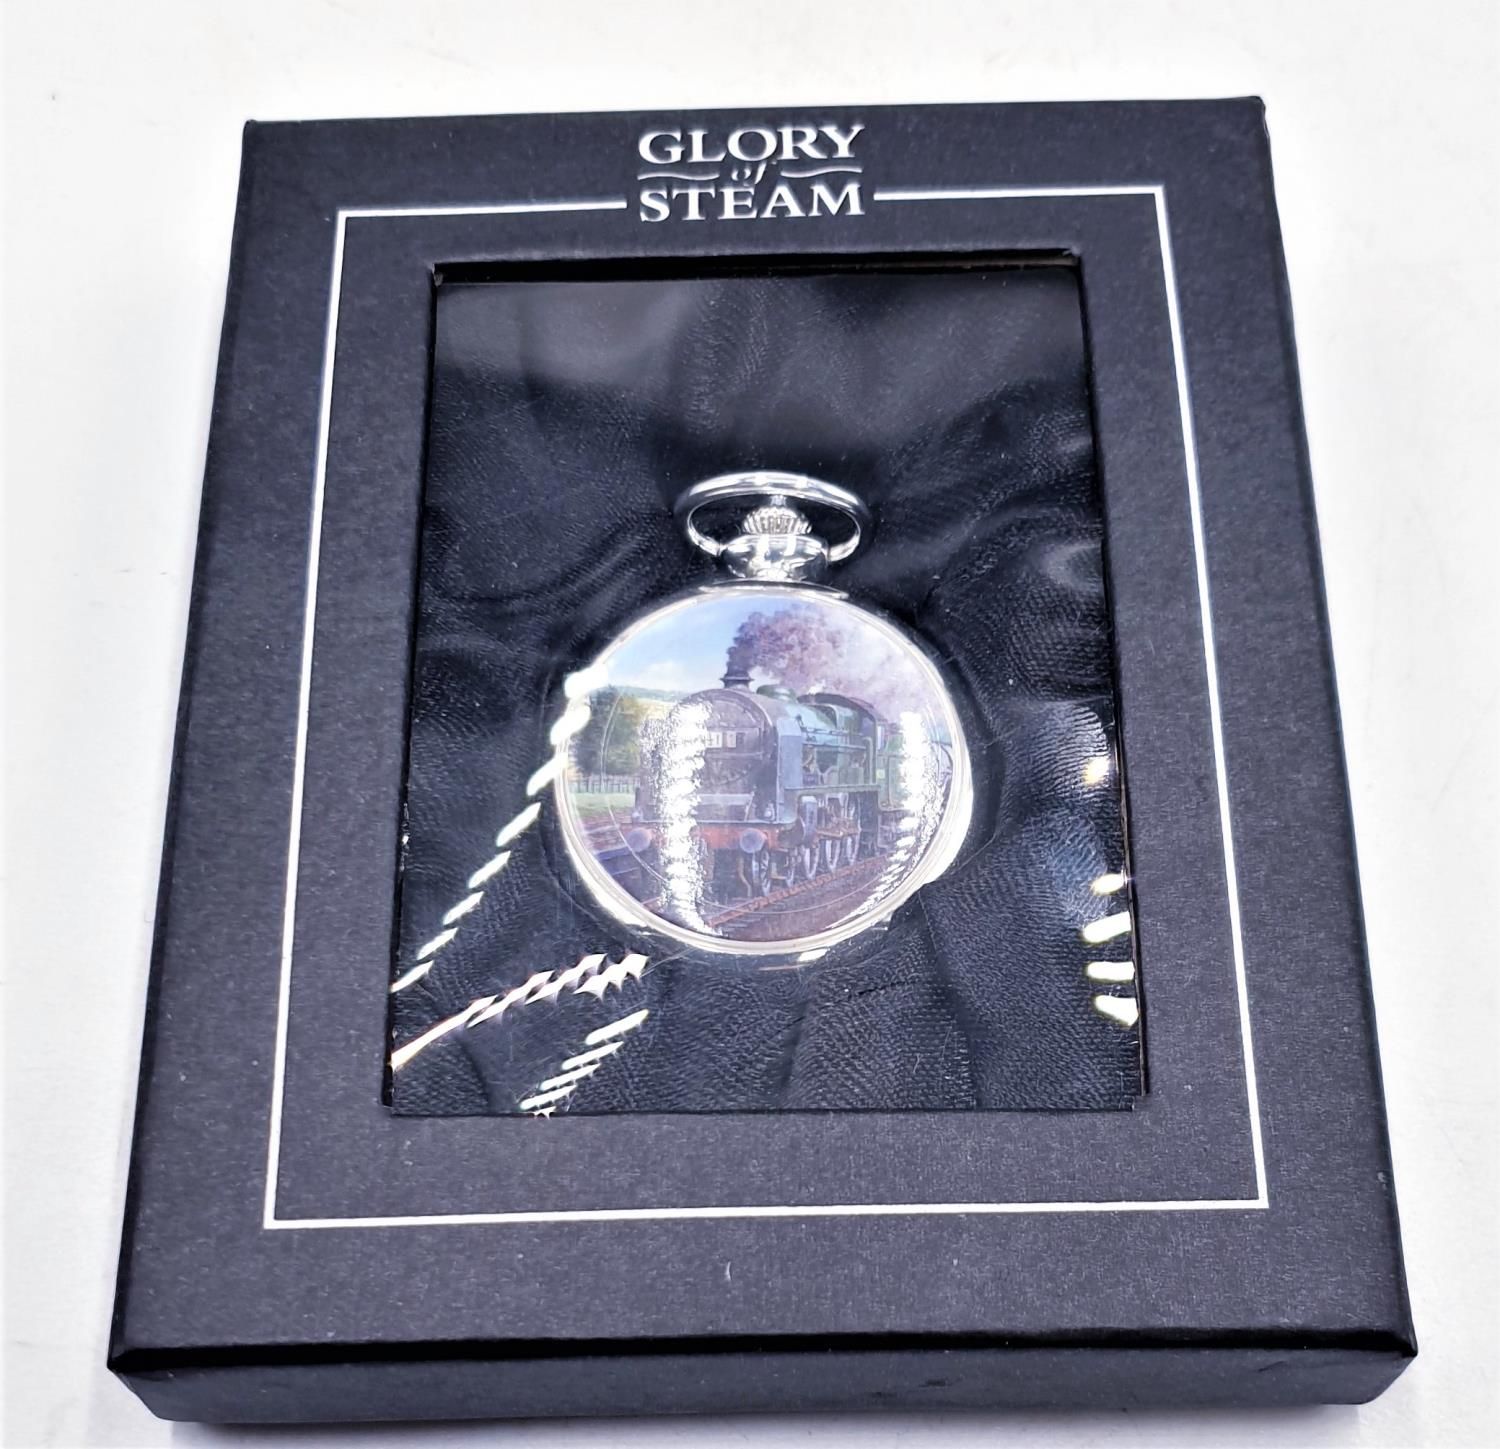 Null GLORY OF STEAM "PATRIOT CLASS" MECHANICAL (Wind Up) POCKET WATCH (Boxed)